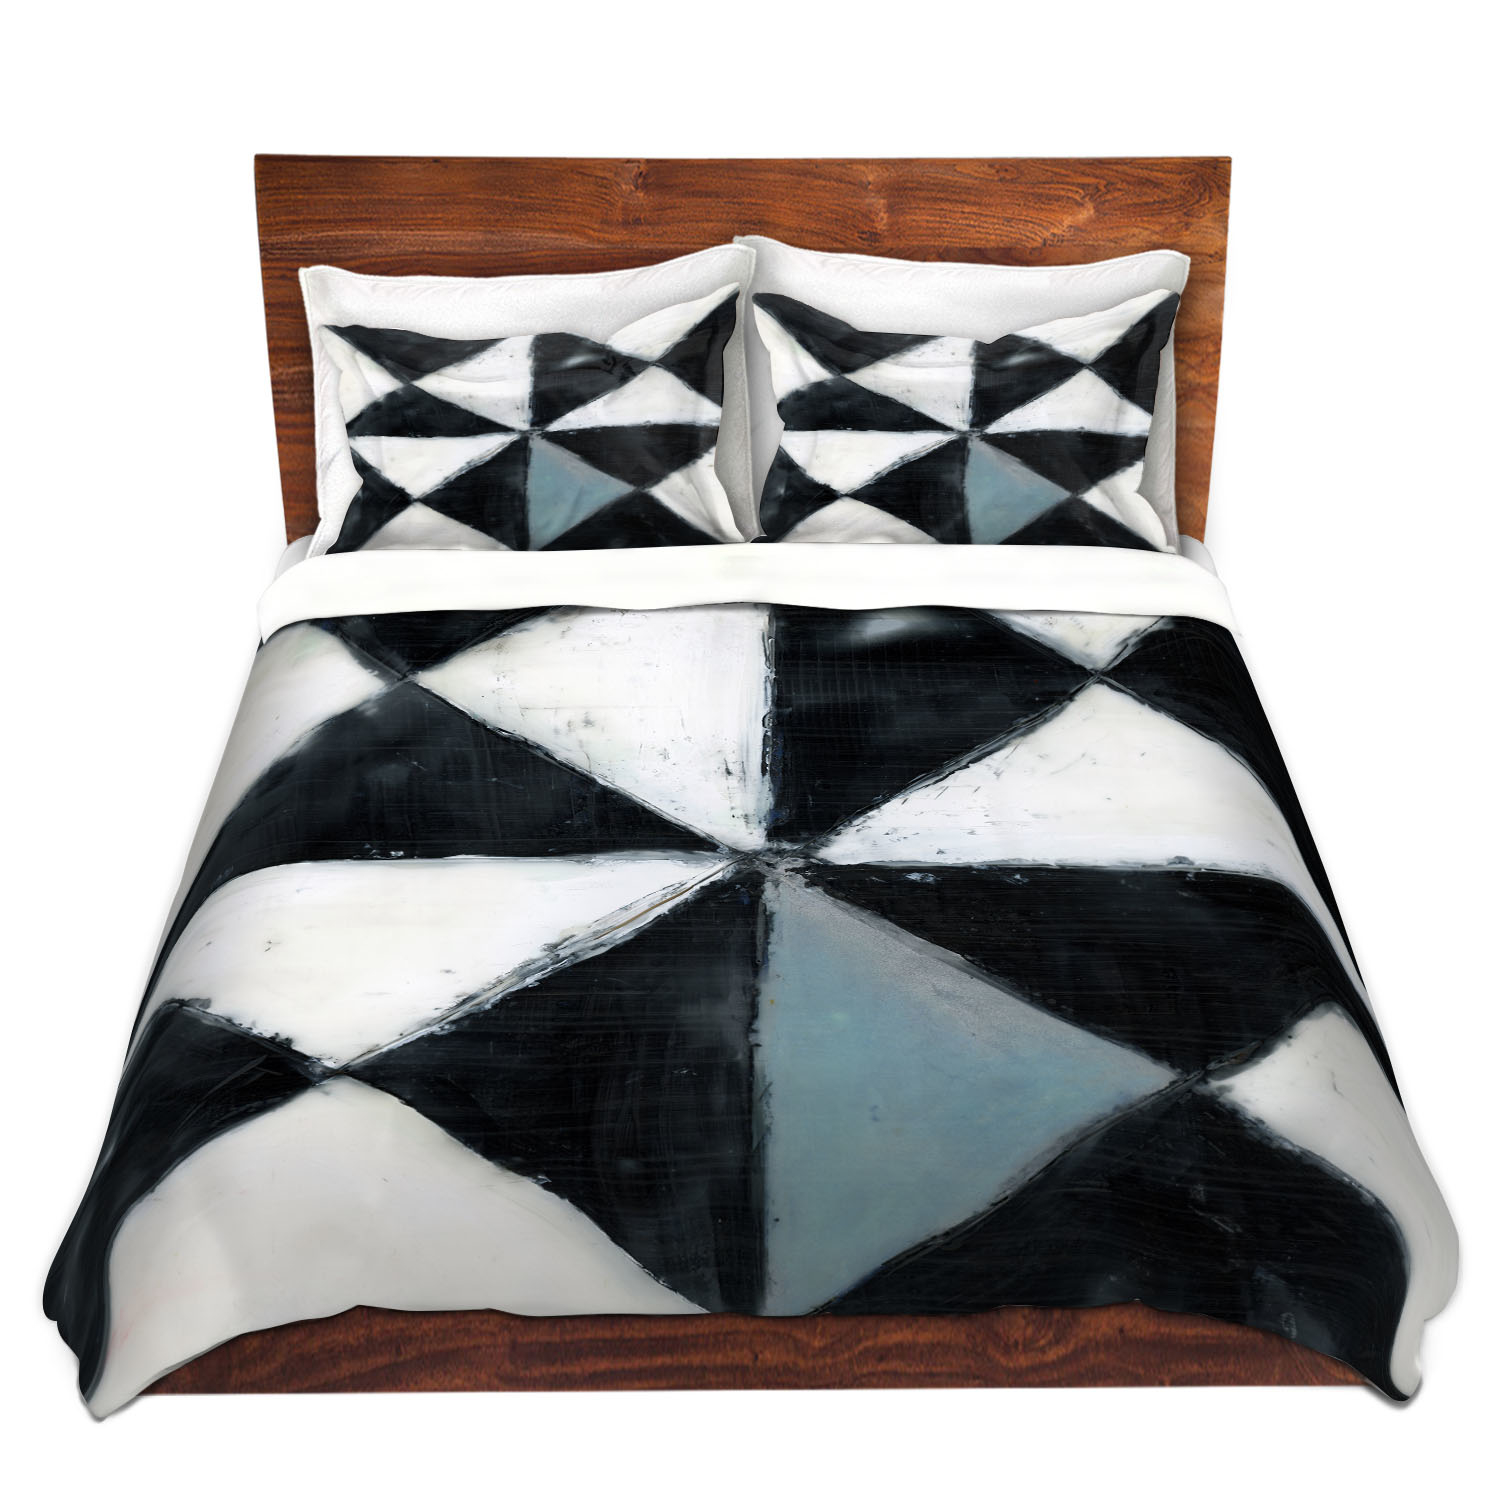 Dianoche Microfiber Duvet Covers By Dora Ficher - Not Always Black Or White 5